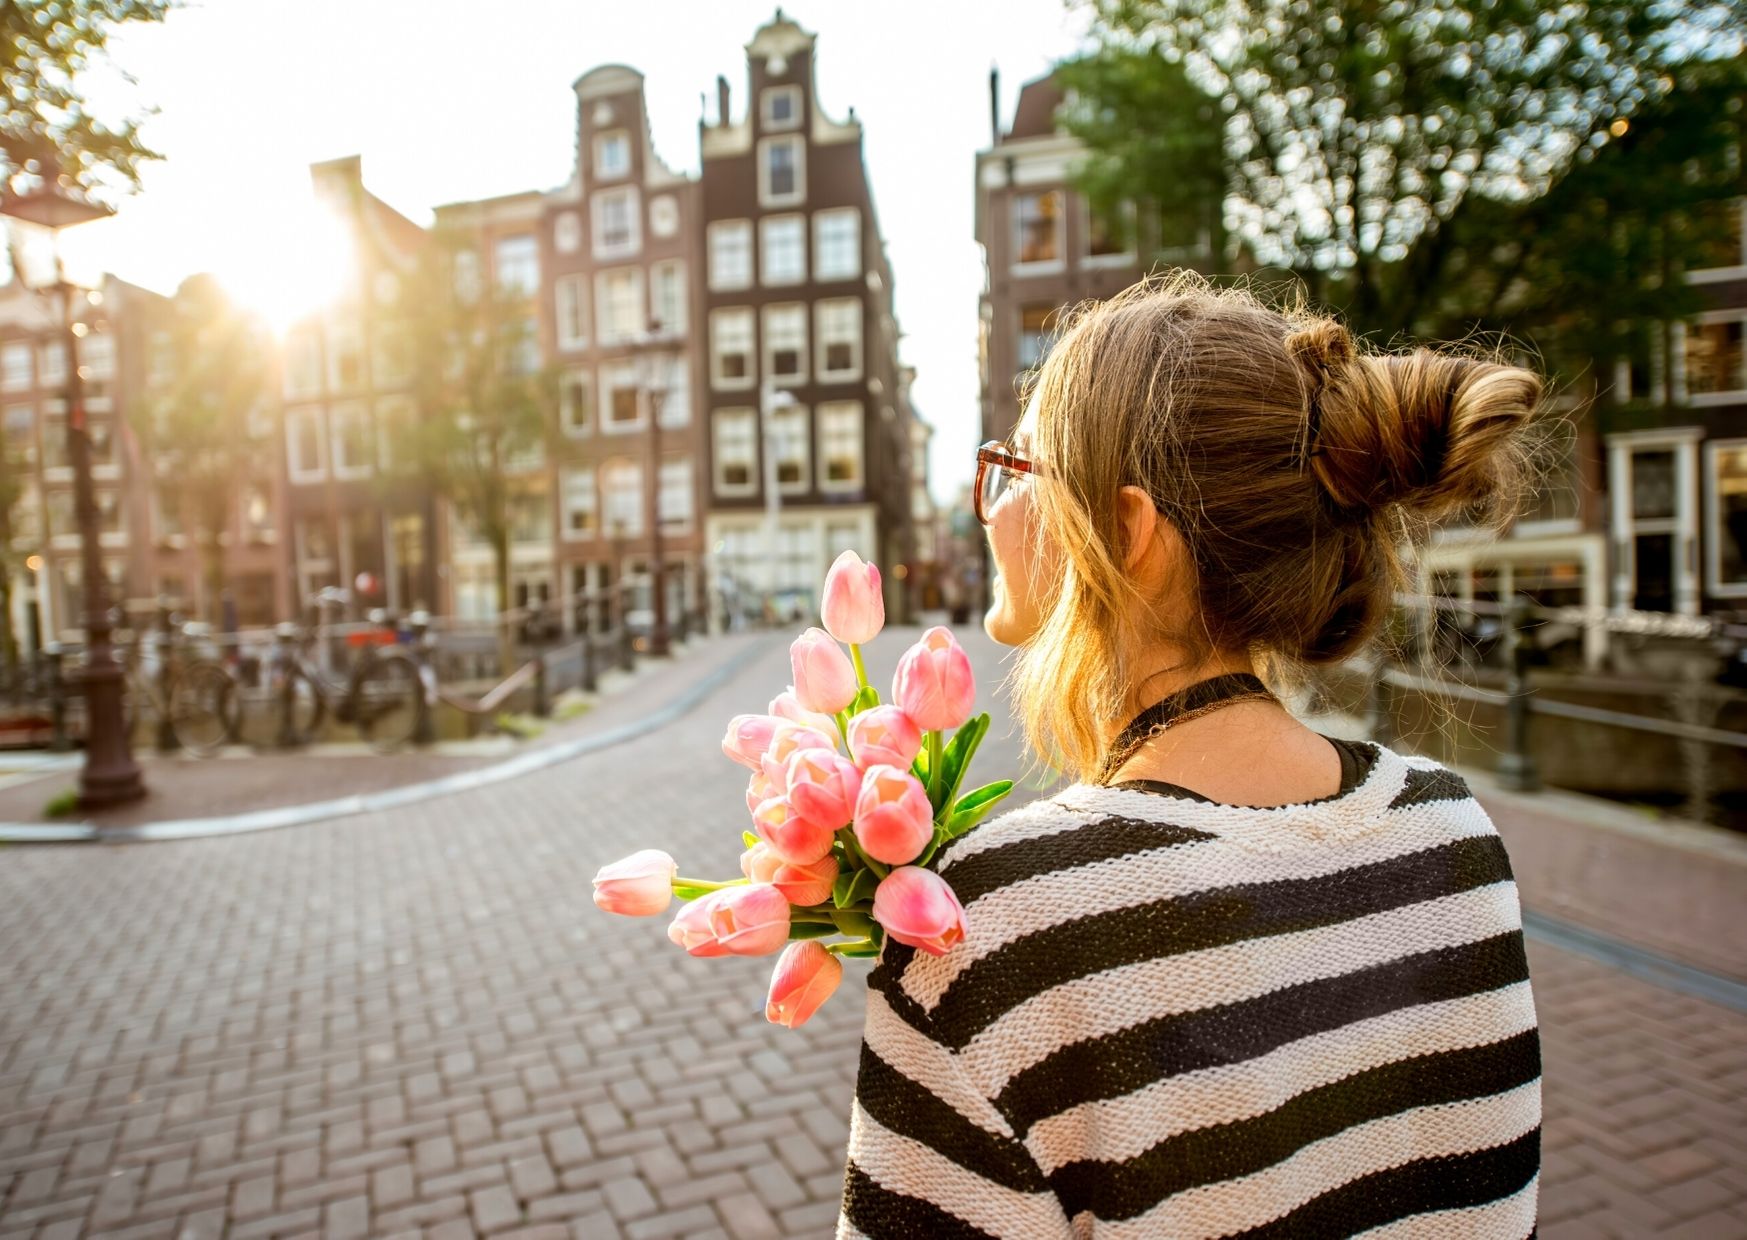 Study in the Netherlands